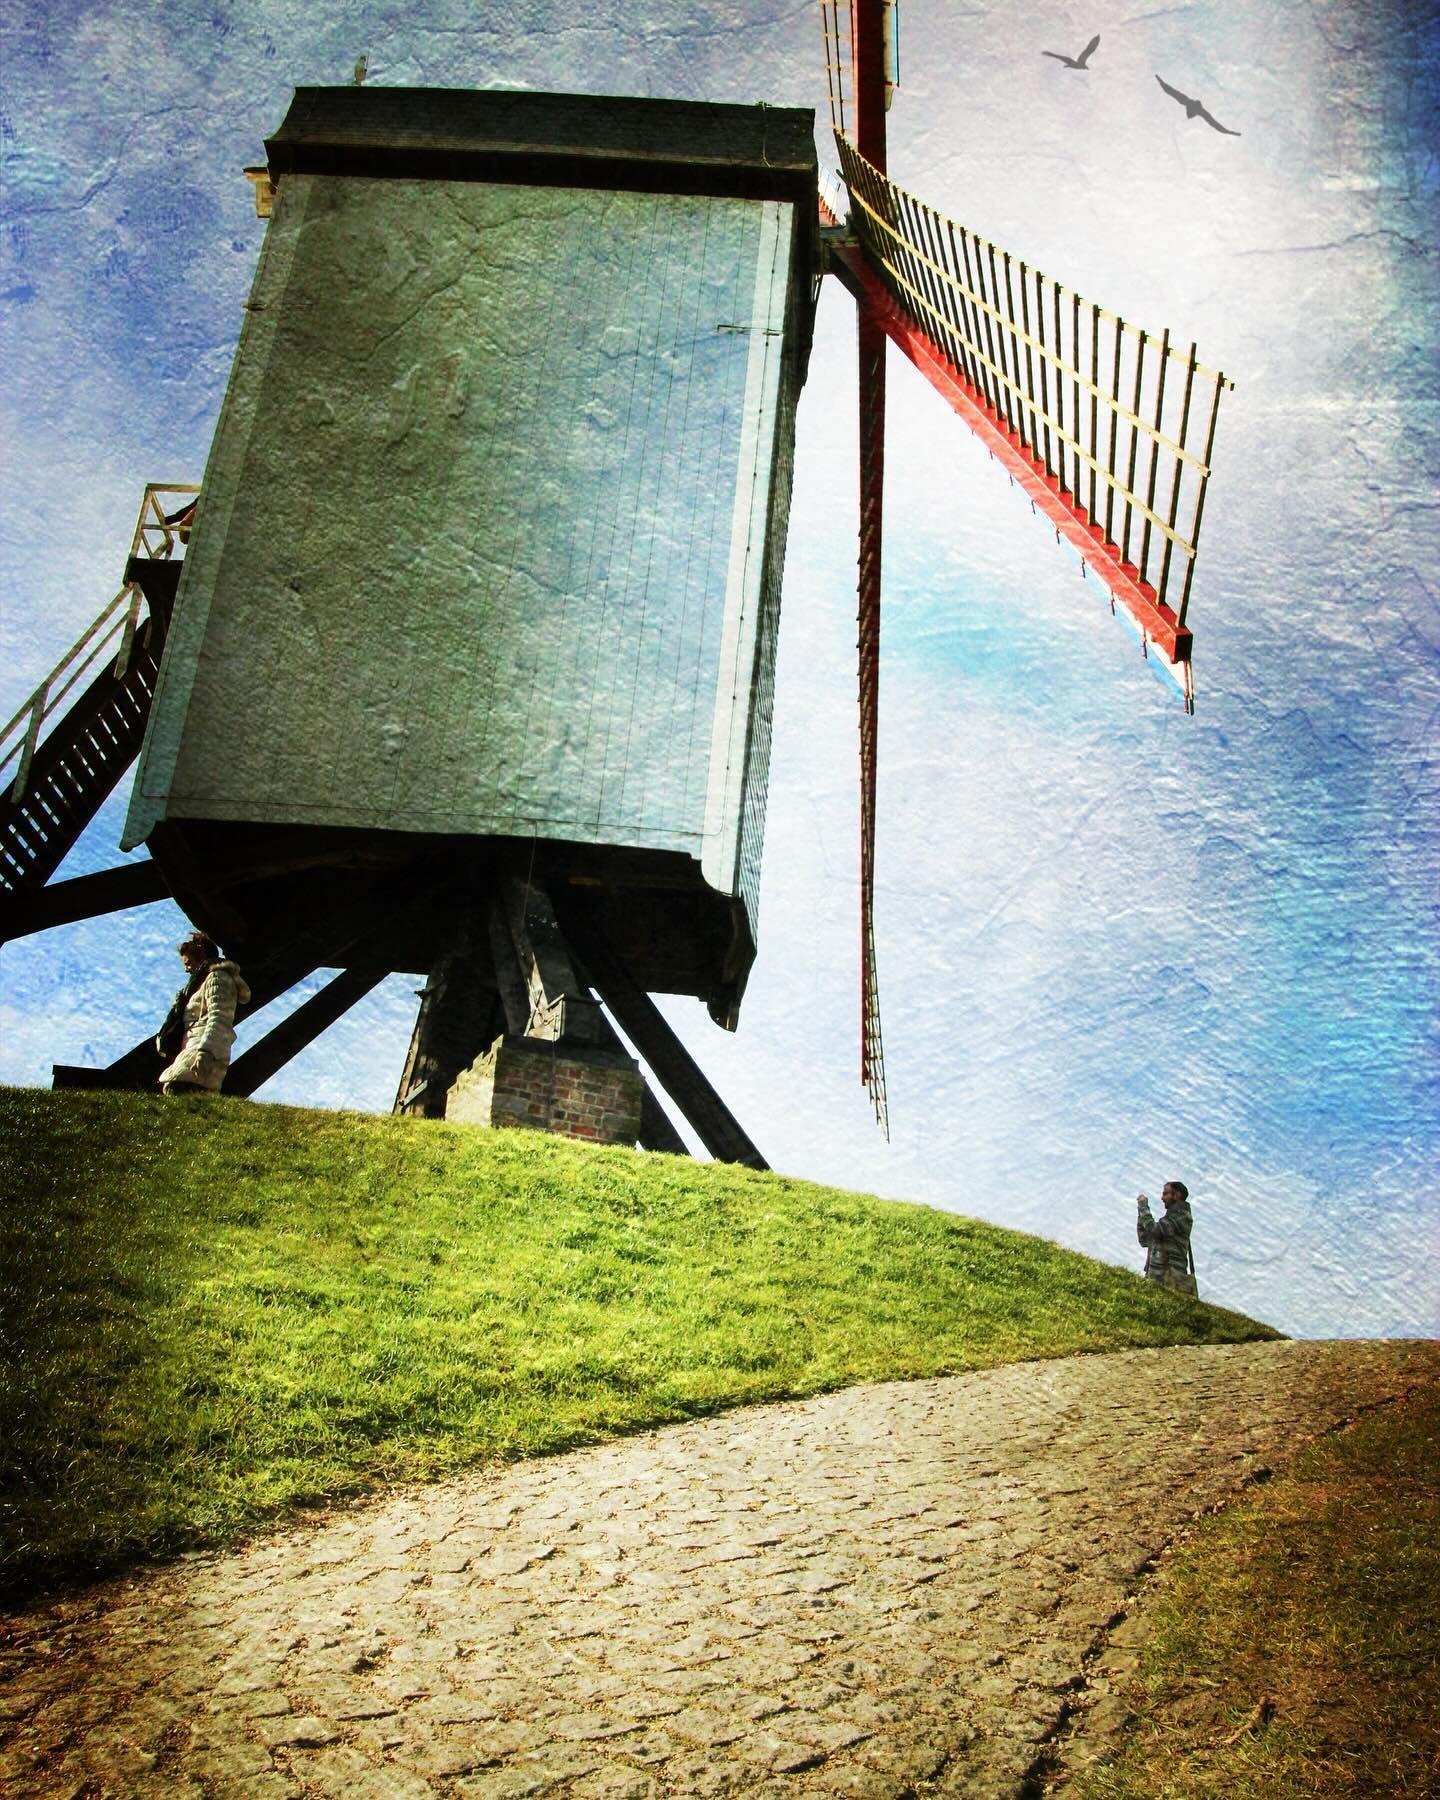 From the archives: 4/11/12 #distressedfx  #chasingwindmills  #inbruges #windmill